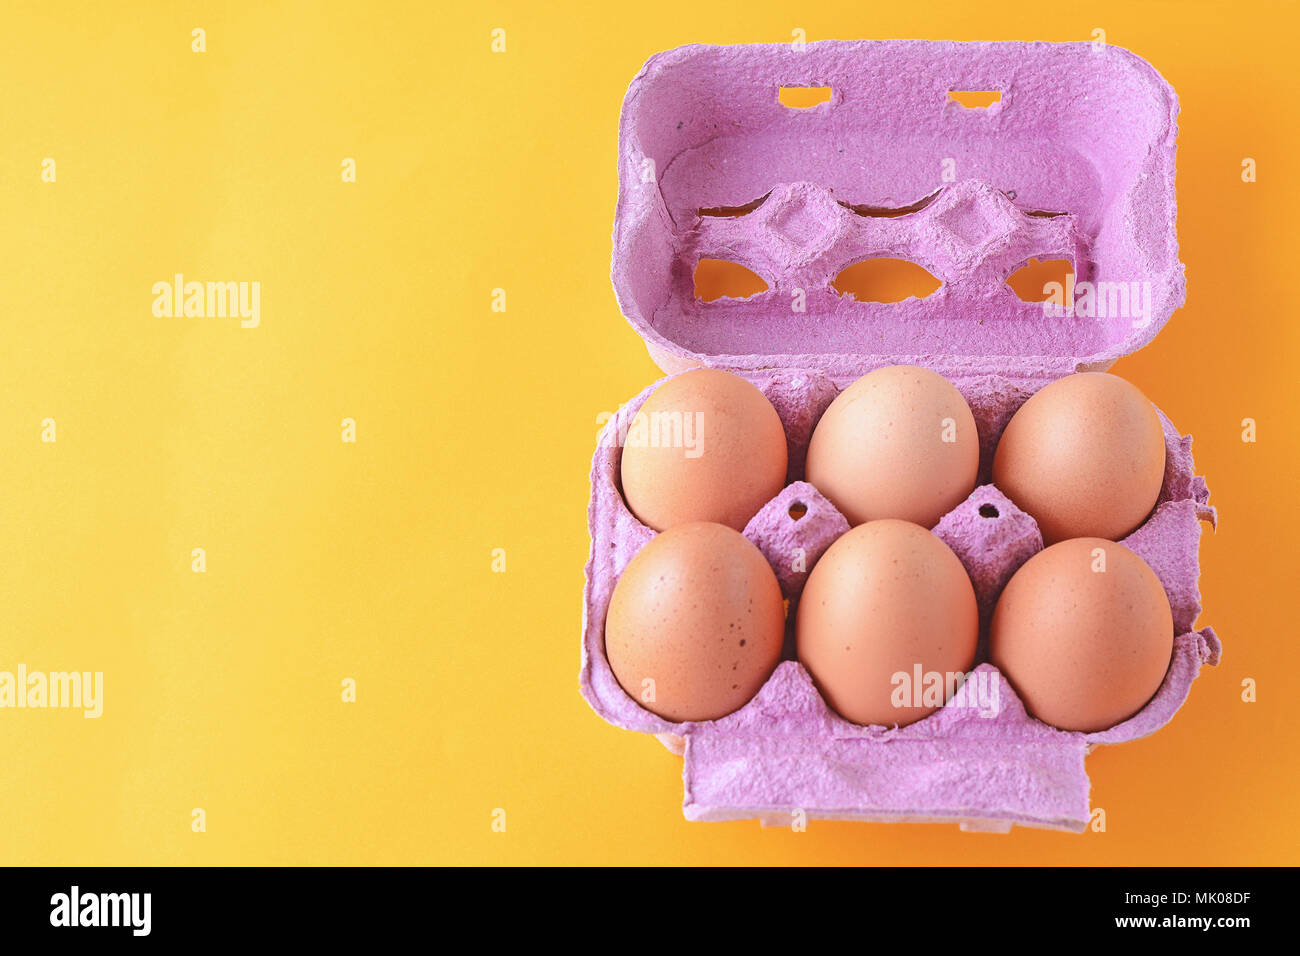 Top view of six brown eggs on box. Fresh food concept. Yellow background Stock Photo